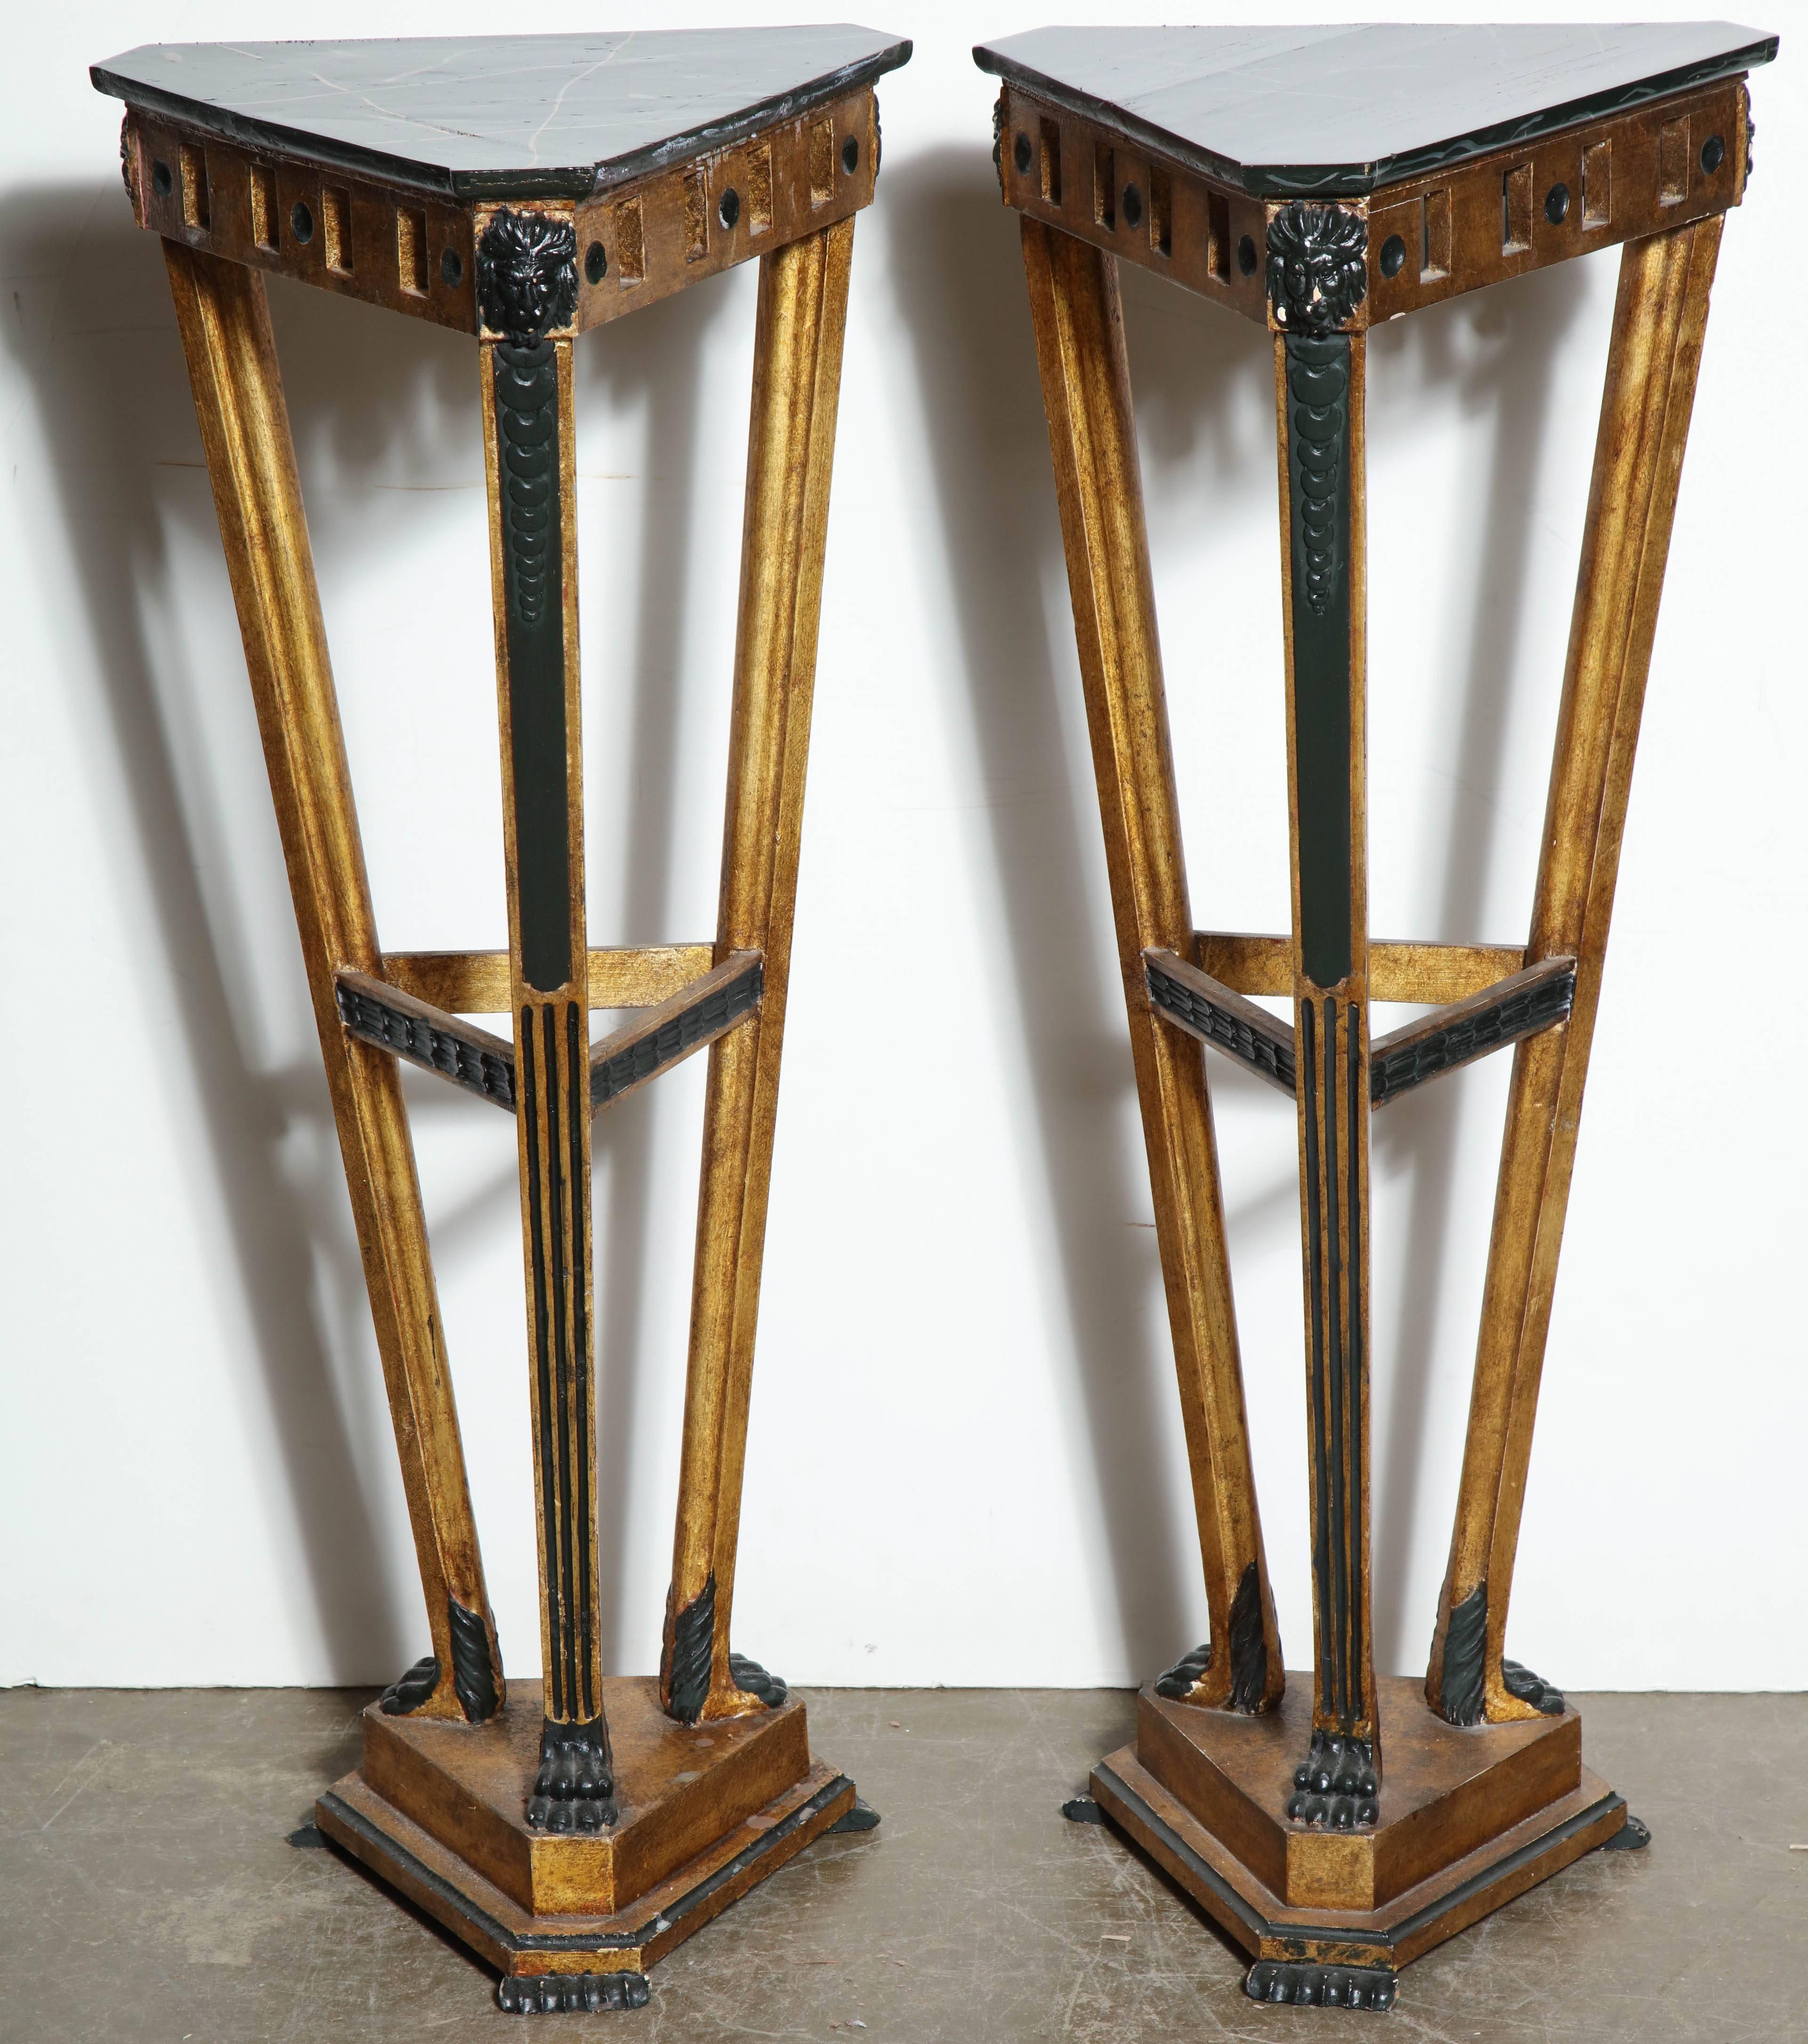 Pair of Italian Empire style gilded and faux marble top triangle form pedestals with pierced aprons and lion head and paw feet carving.